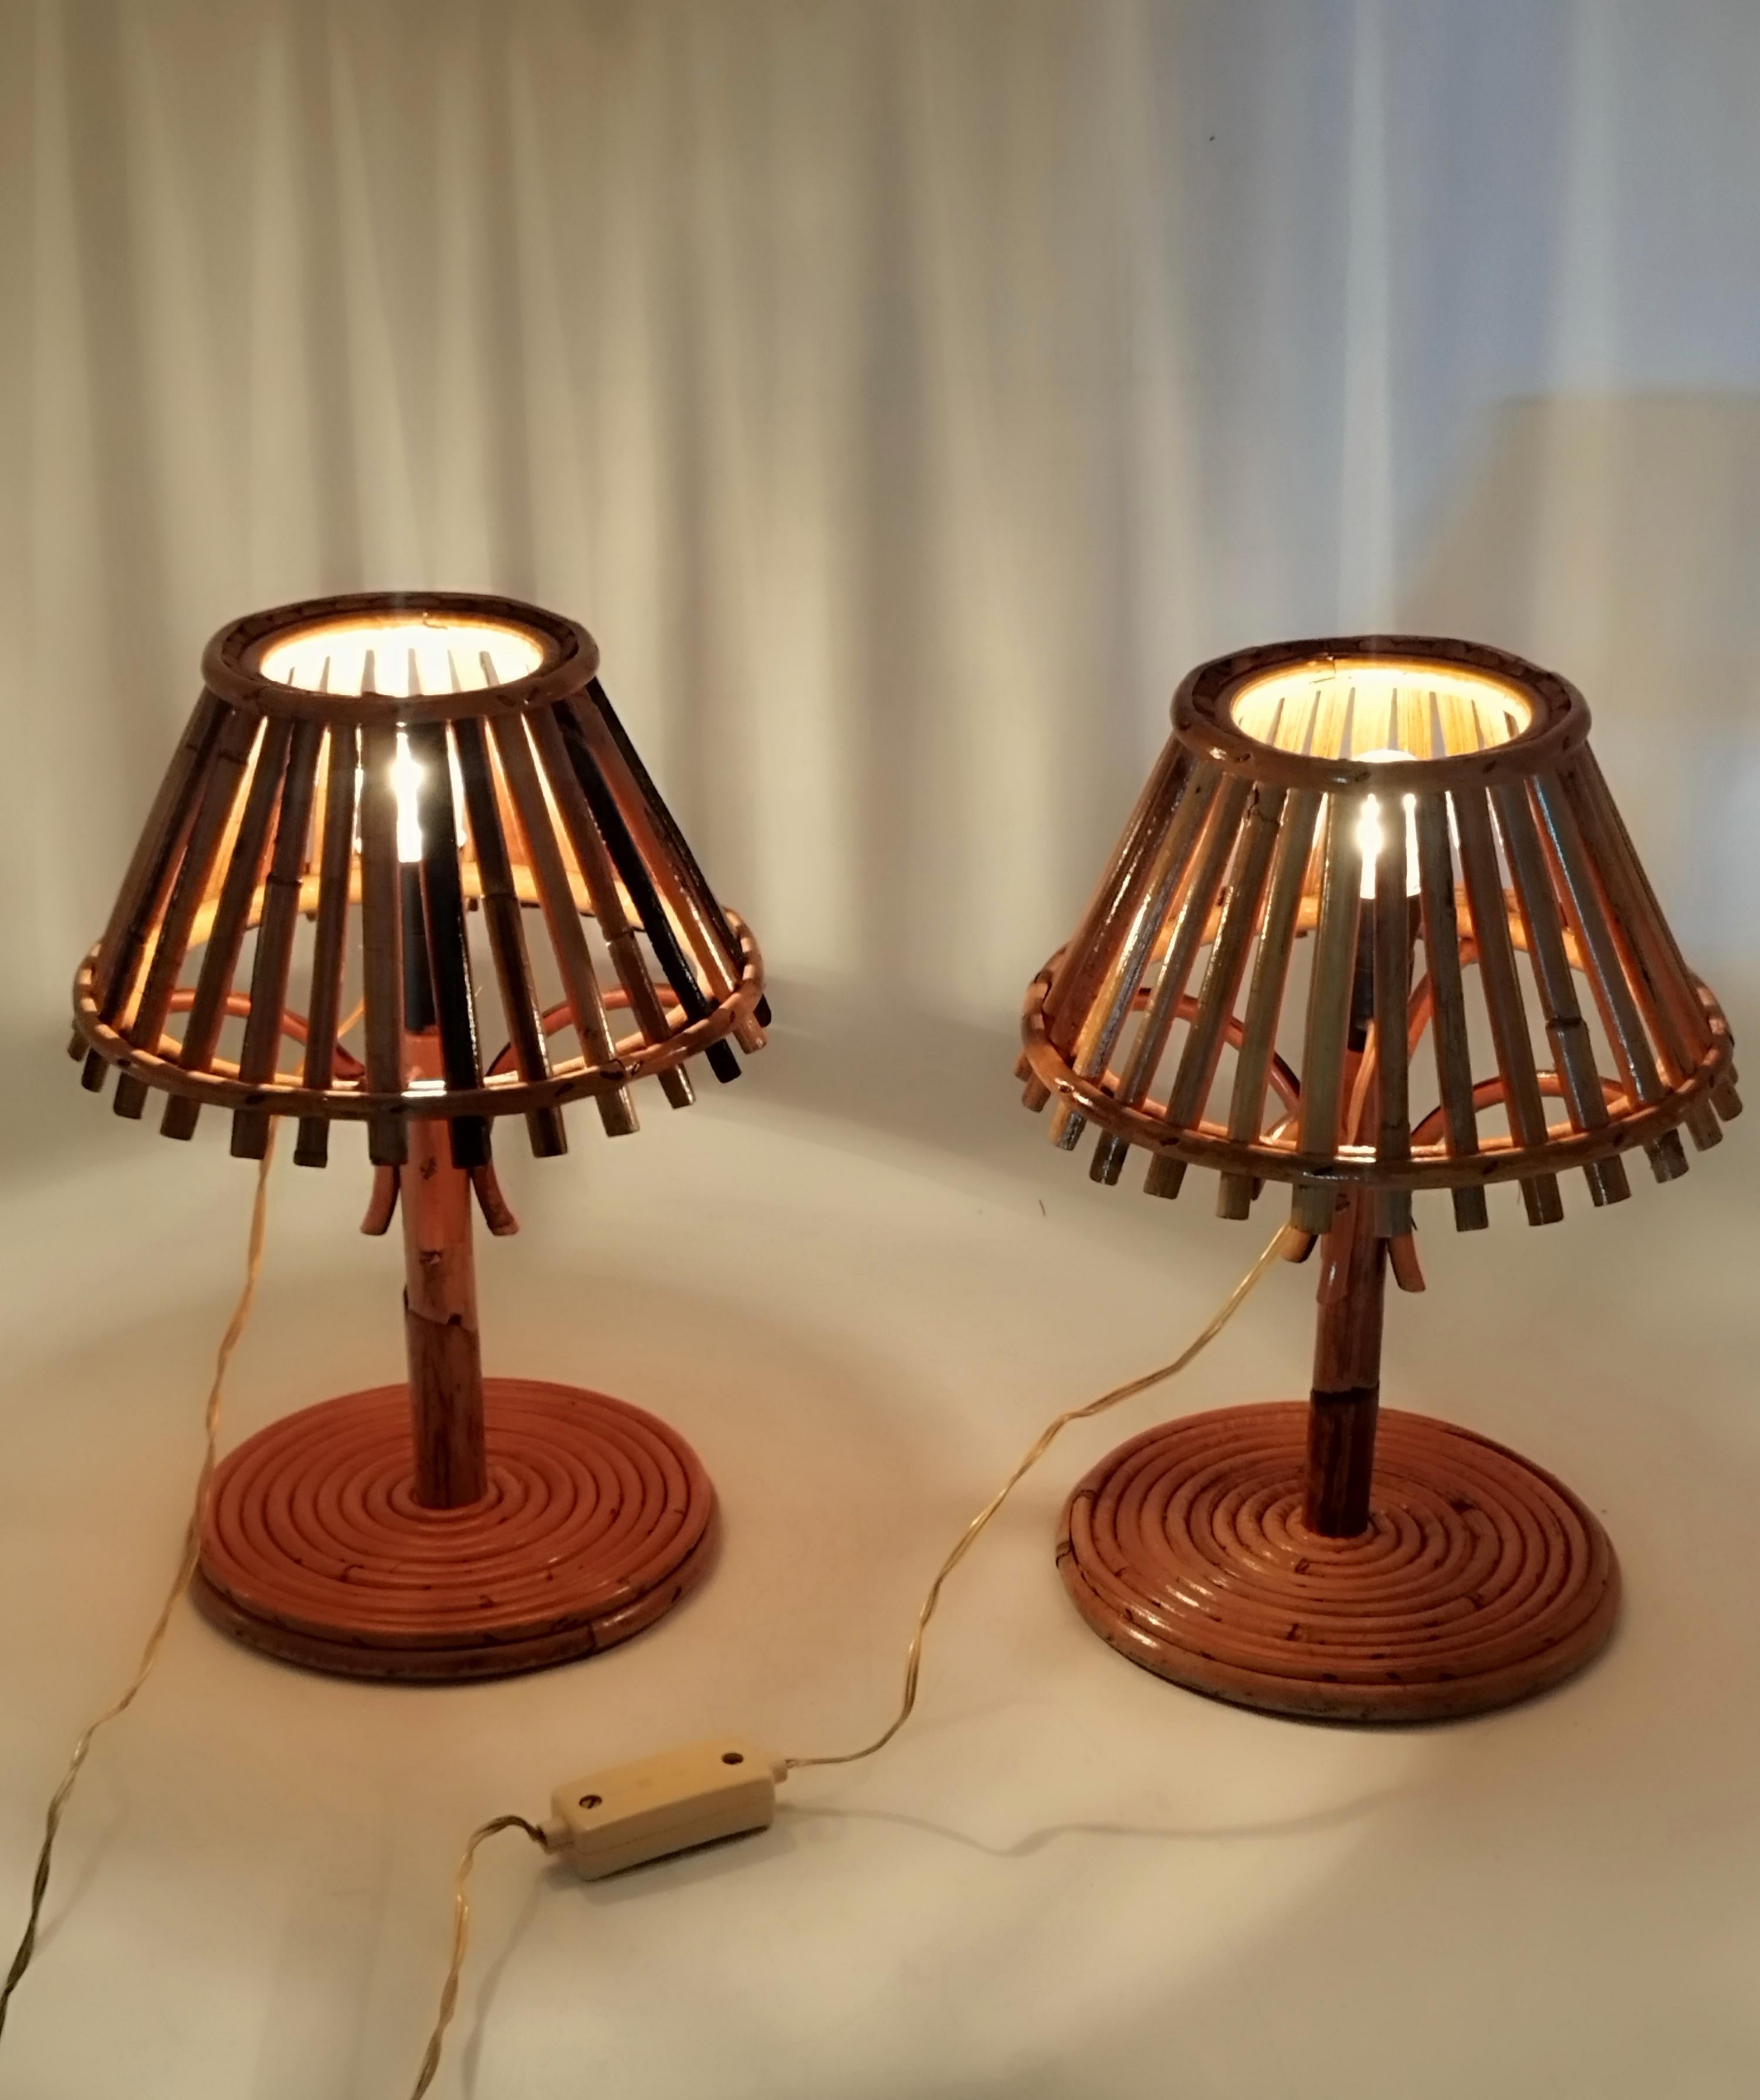 Pair of Rattan and Bamboo Table Lamps, Italy, 1960s For Sale 1